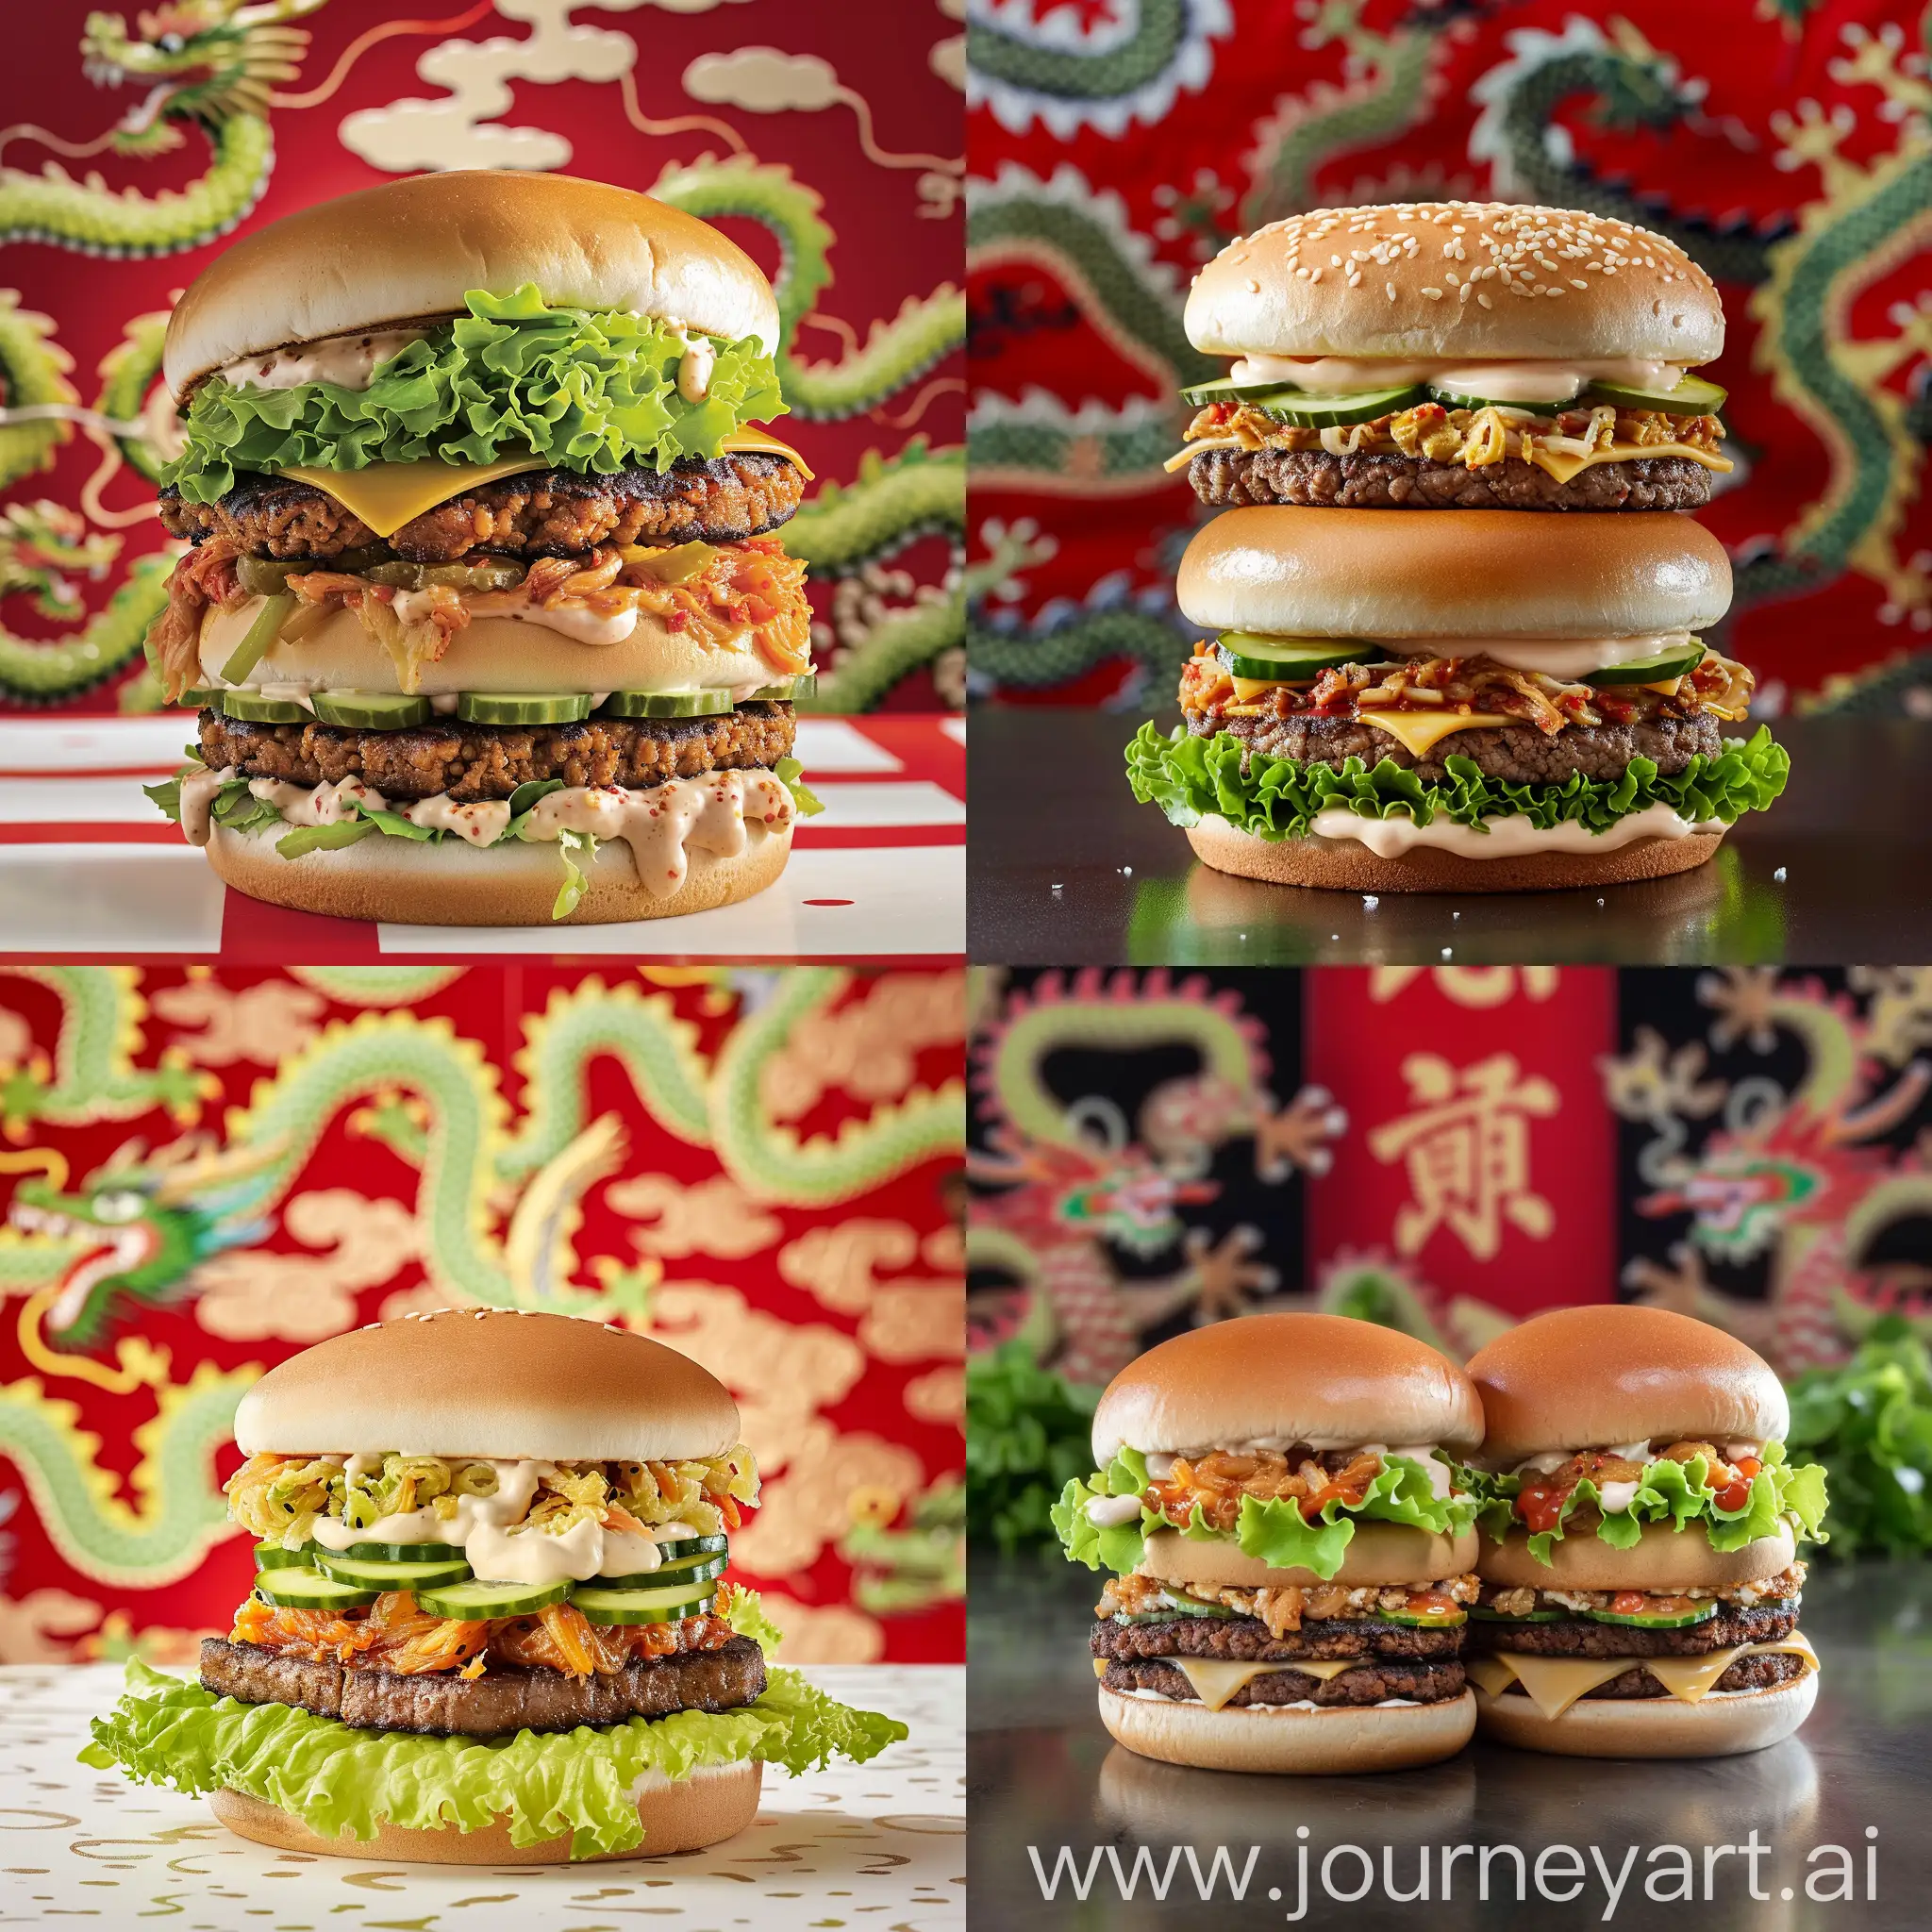 The Oriental Mac Vegan is an exotic variation on the classic Big Mac. The combination of juicy vegan steak, crispy vegetables and aromatic Asian ingredients creates a burger that will take you straight to the heart of Asia.

Ingredients:

Bao bun - soft and steamed, perfectly matching Asian flavors.

Two vegan steak - seasoned with soy sauce and ginger for an oriental flavor.

Kimchi - spicy Korean fermented cabbage, adding spiciness and depth of flavor to the burger.

Romaine lettuce - fresh and crunchy.

Pickled cucumber - for a refreshing taste.

Teriyaki sauce - sweet and salty sauce based on soy sauce and mirin.

Japanese mayonnaise - delicate and creamy, with the addition of rice vinegar.

Accessories:

Optionally, you can add to Oriental Mac:

Sriracha sauce - for even greater spiciness.

Avocado - adding a creamy texture and rich flavor to the burger.

Marinated shiitake mushrooms - enriching the burger with an aromatic, mushroom flavor.

In the background of sandwich a lot of chinese dragons heralding chinesee new year